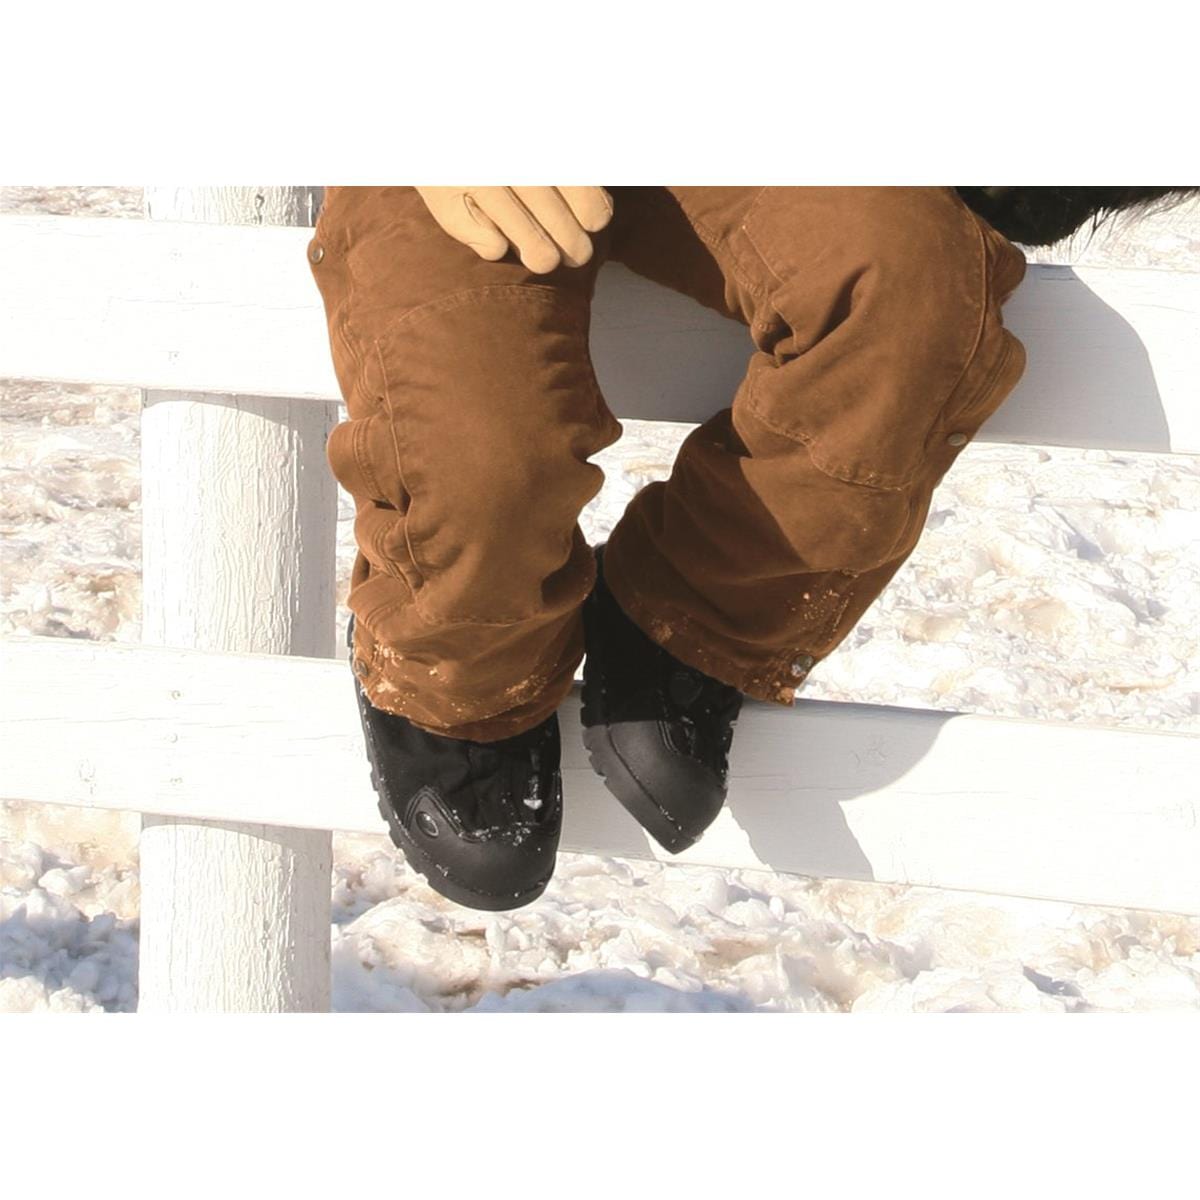 Explorer™ 11"H Insulated Overshoes